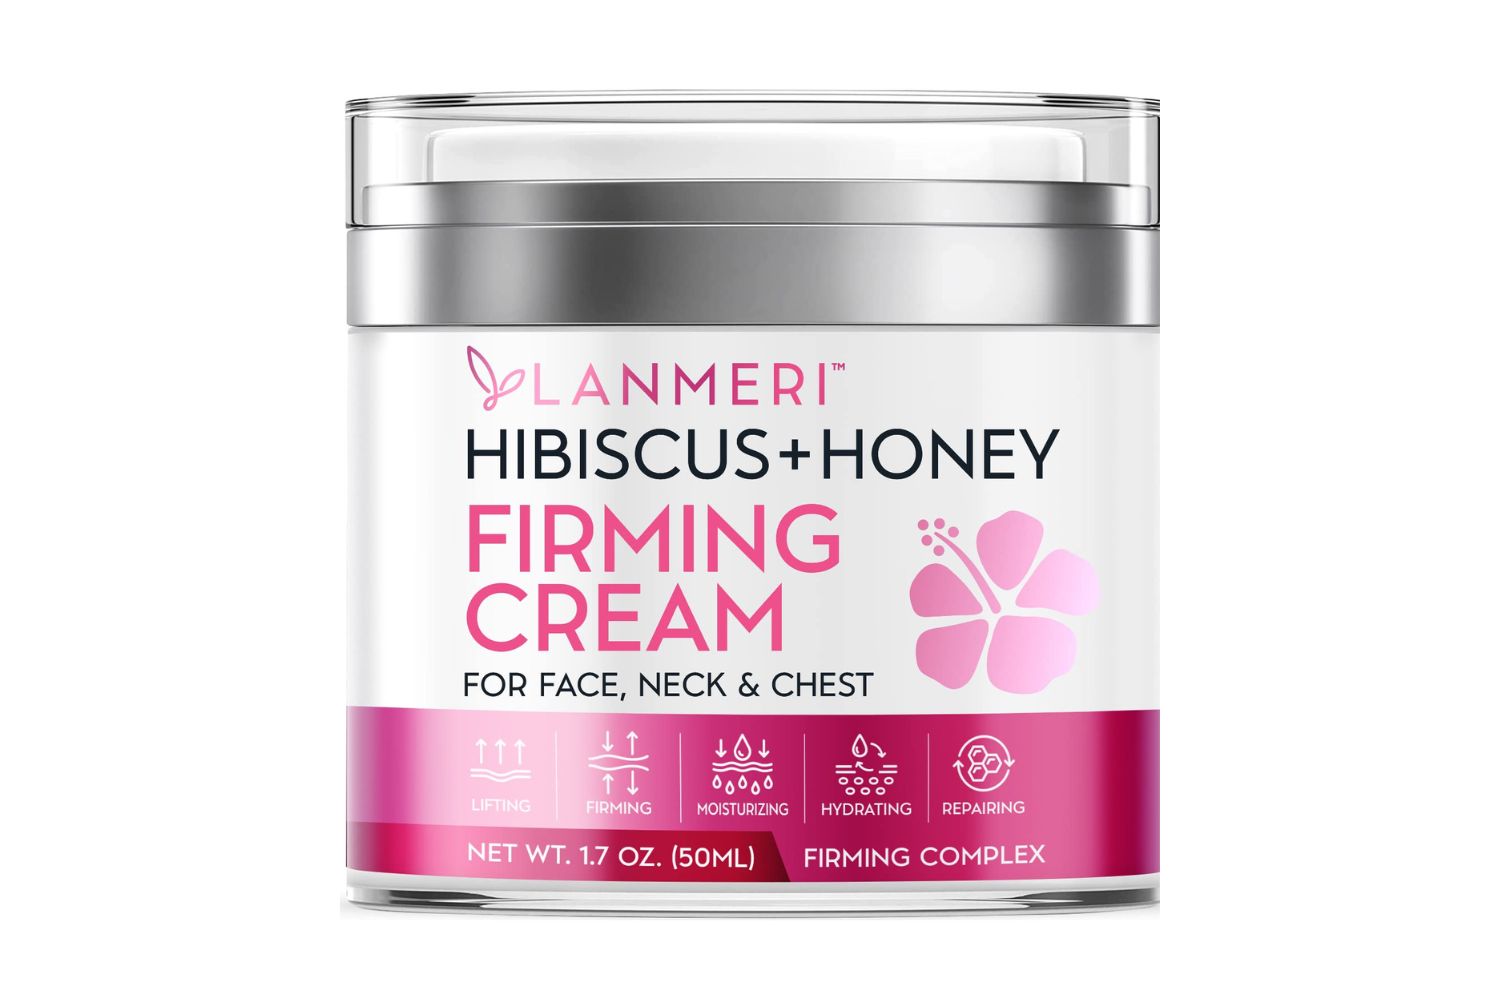 18-mind-blowing-facts-about-hibiscus-and-honey-firming-cream